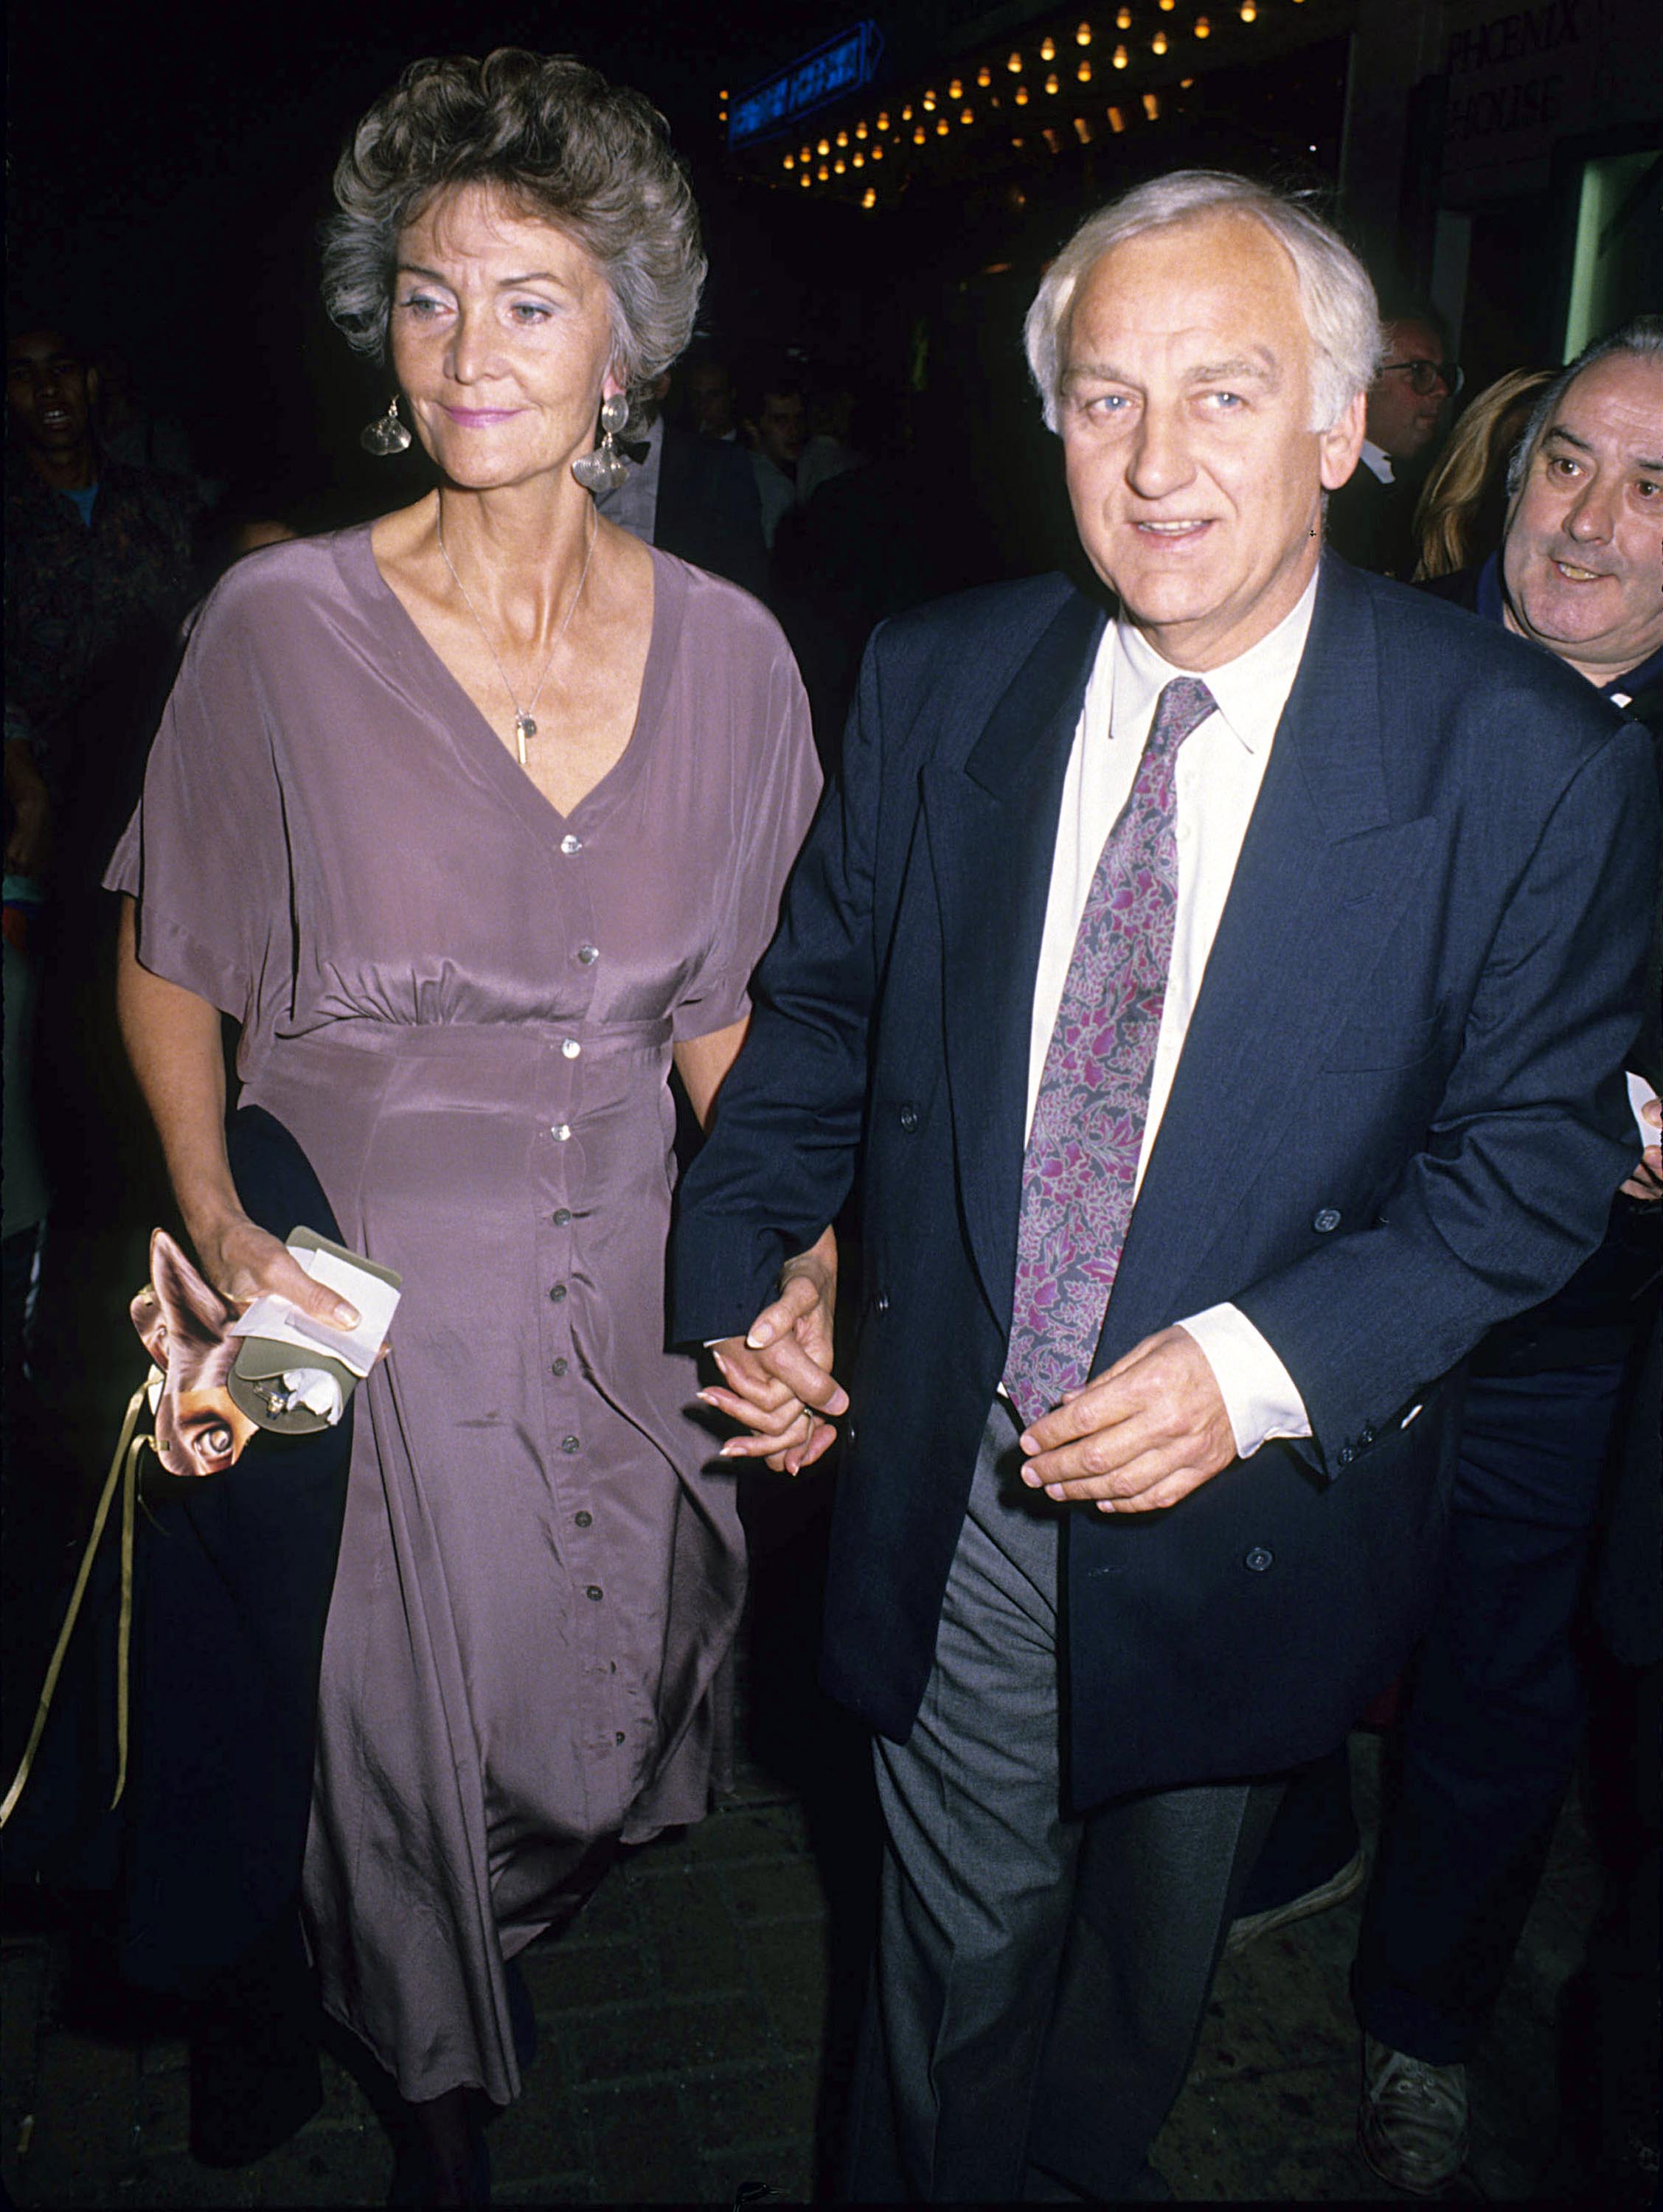 Sheila Hancock and John Thaw during "Shylock" Theatre Performance - Arrivals - July 10, 1989 | Photo: Getty Images